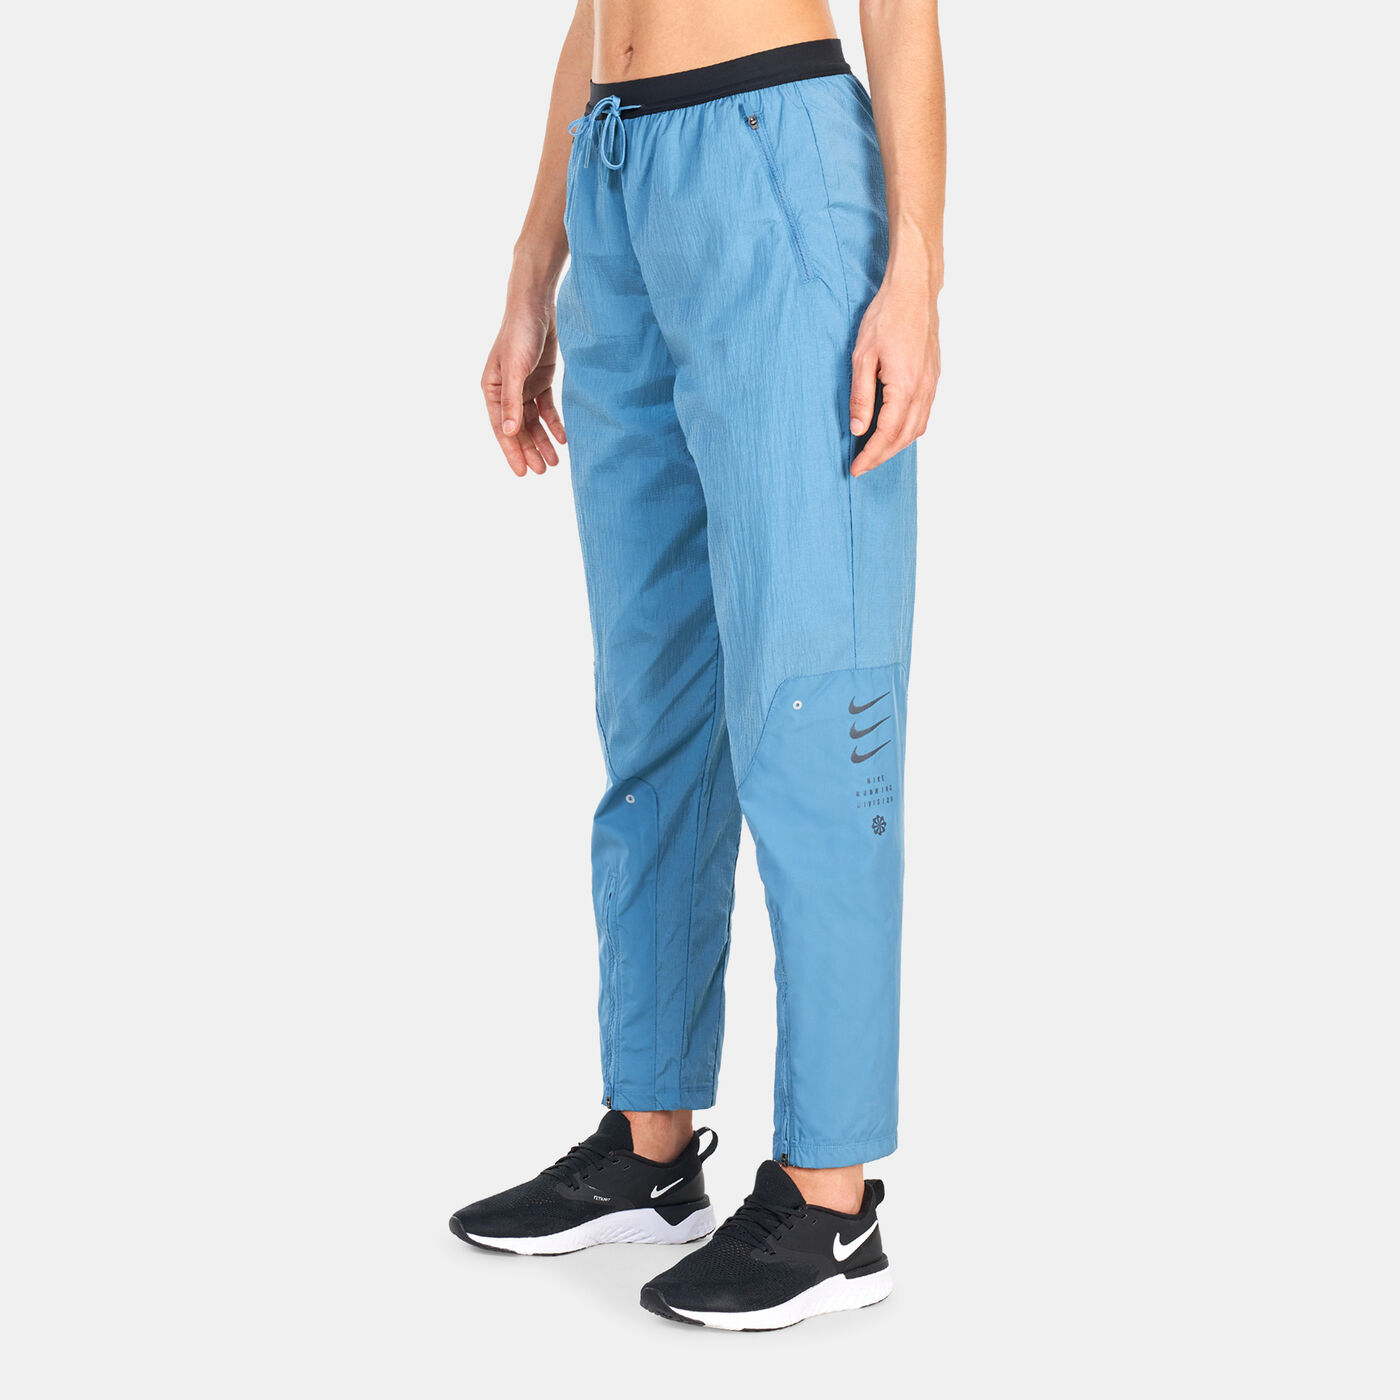 Women's Therma-FIT Run Division Pants